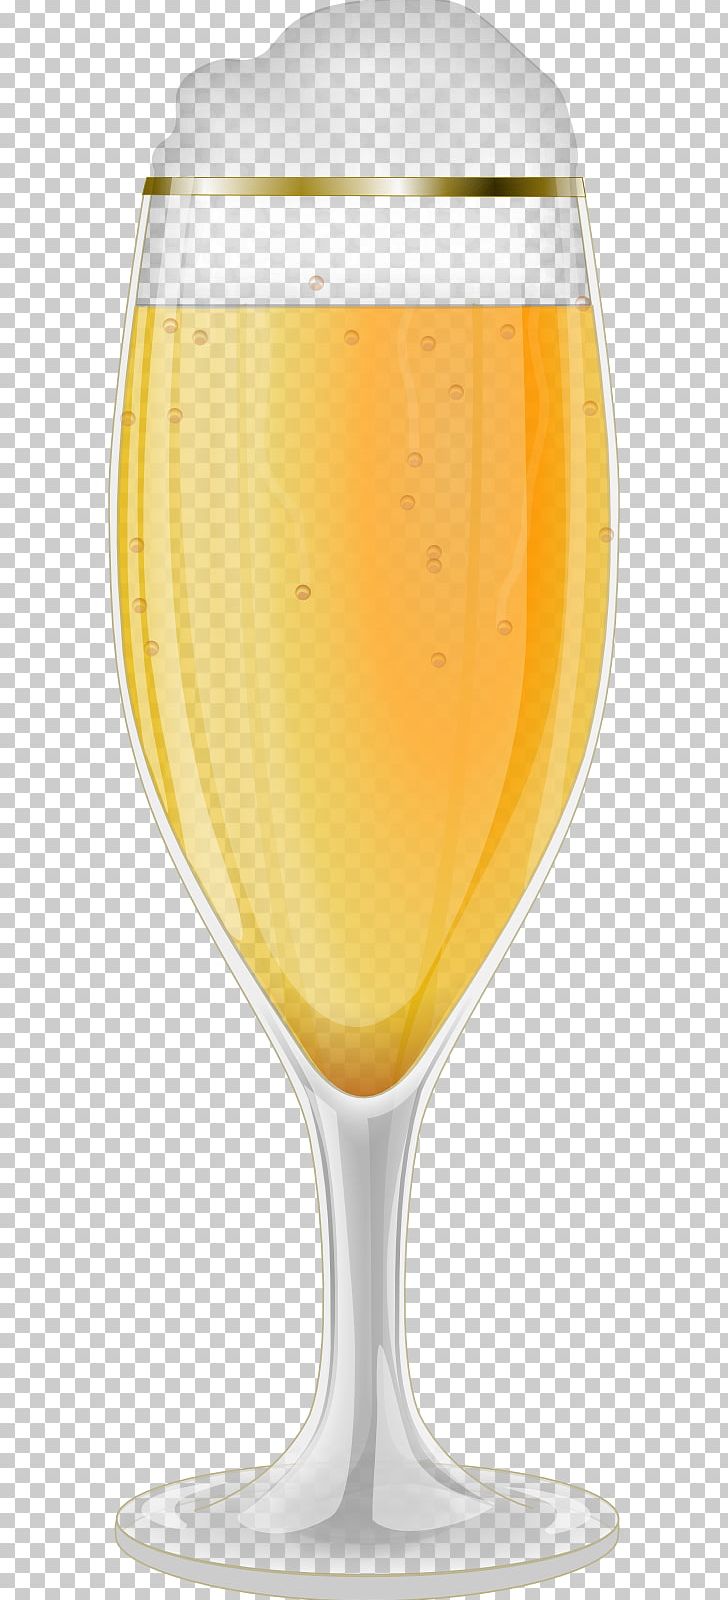 Lager Beer Glasses Cocktail Drink PNG, Clipart, Alcoholic Drink, Beer, Beer Bottle, Beer Glass, Beer Glasses Free PNG Download